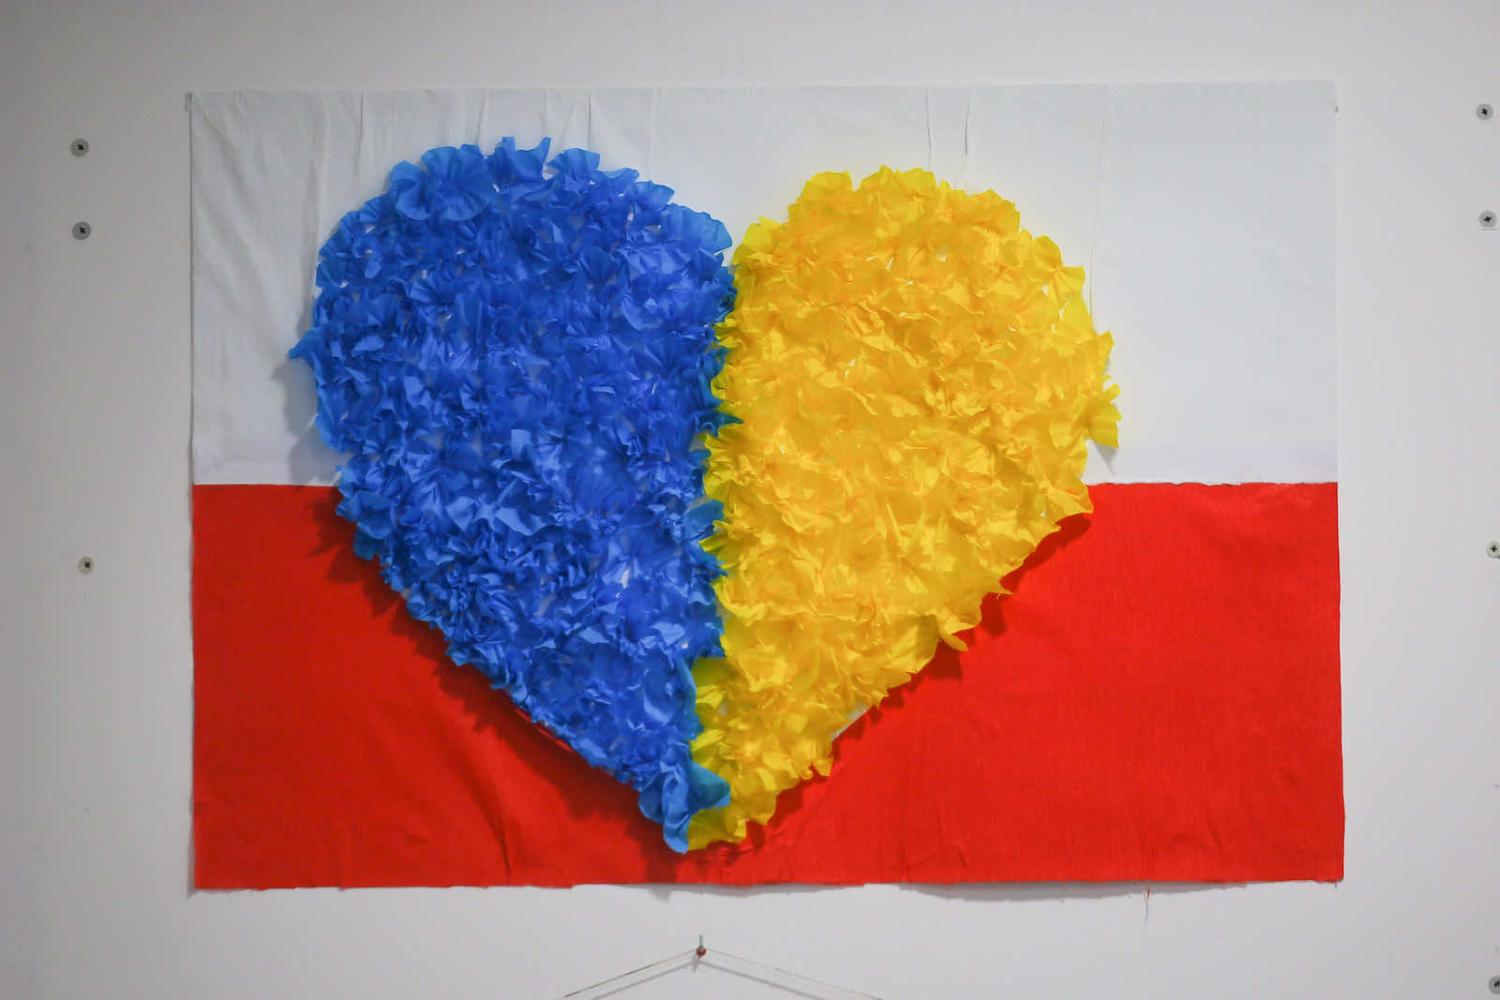 A decoration using the colours of the Ukrainian and Polish flags seen on the wall in a refugee shelter in Warsaw (Aziz Karimov via Getty Images)